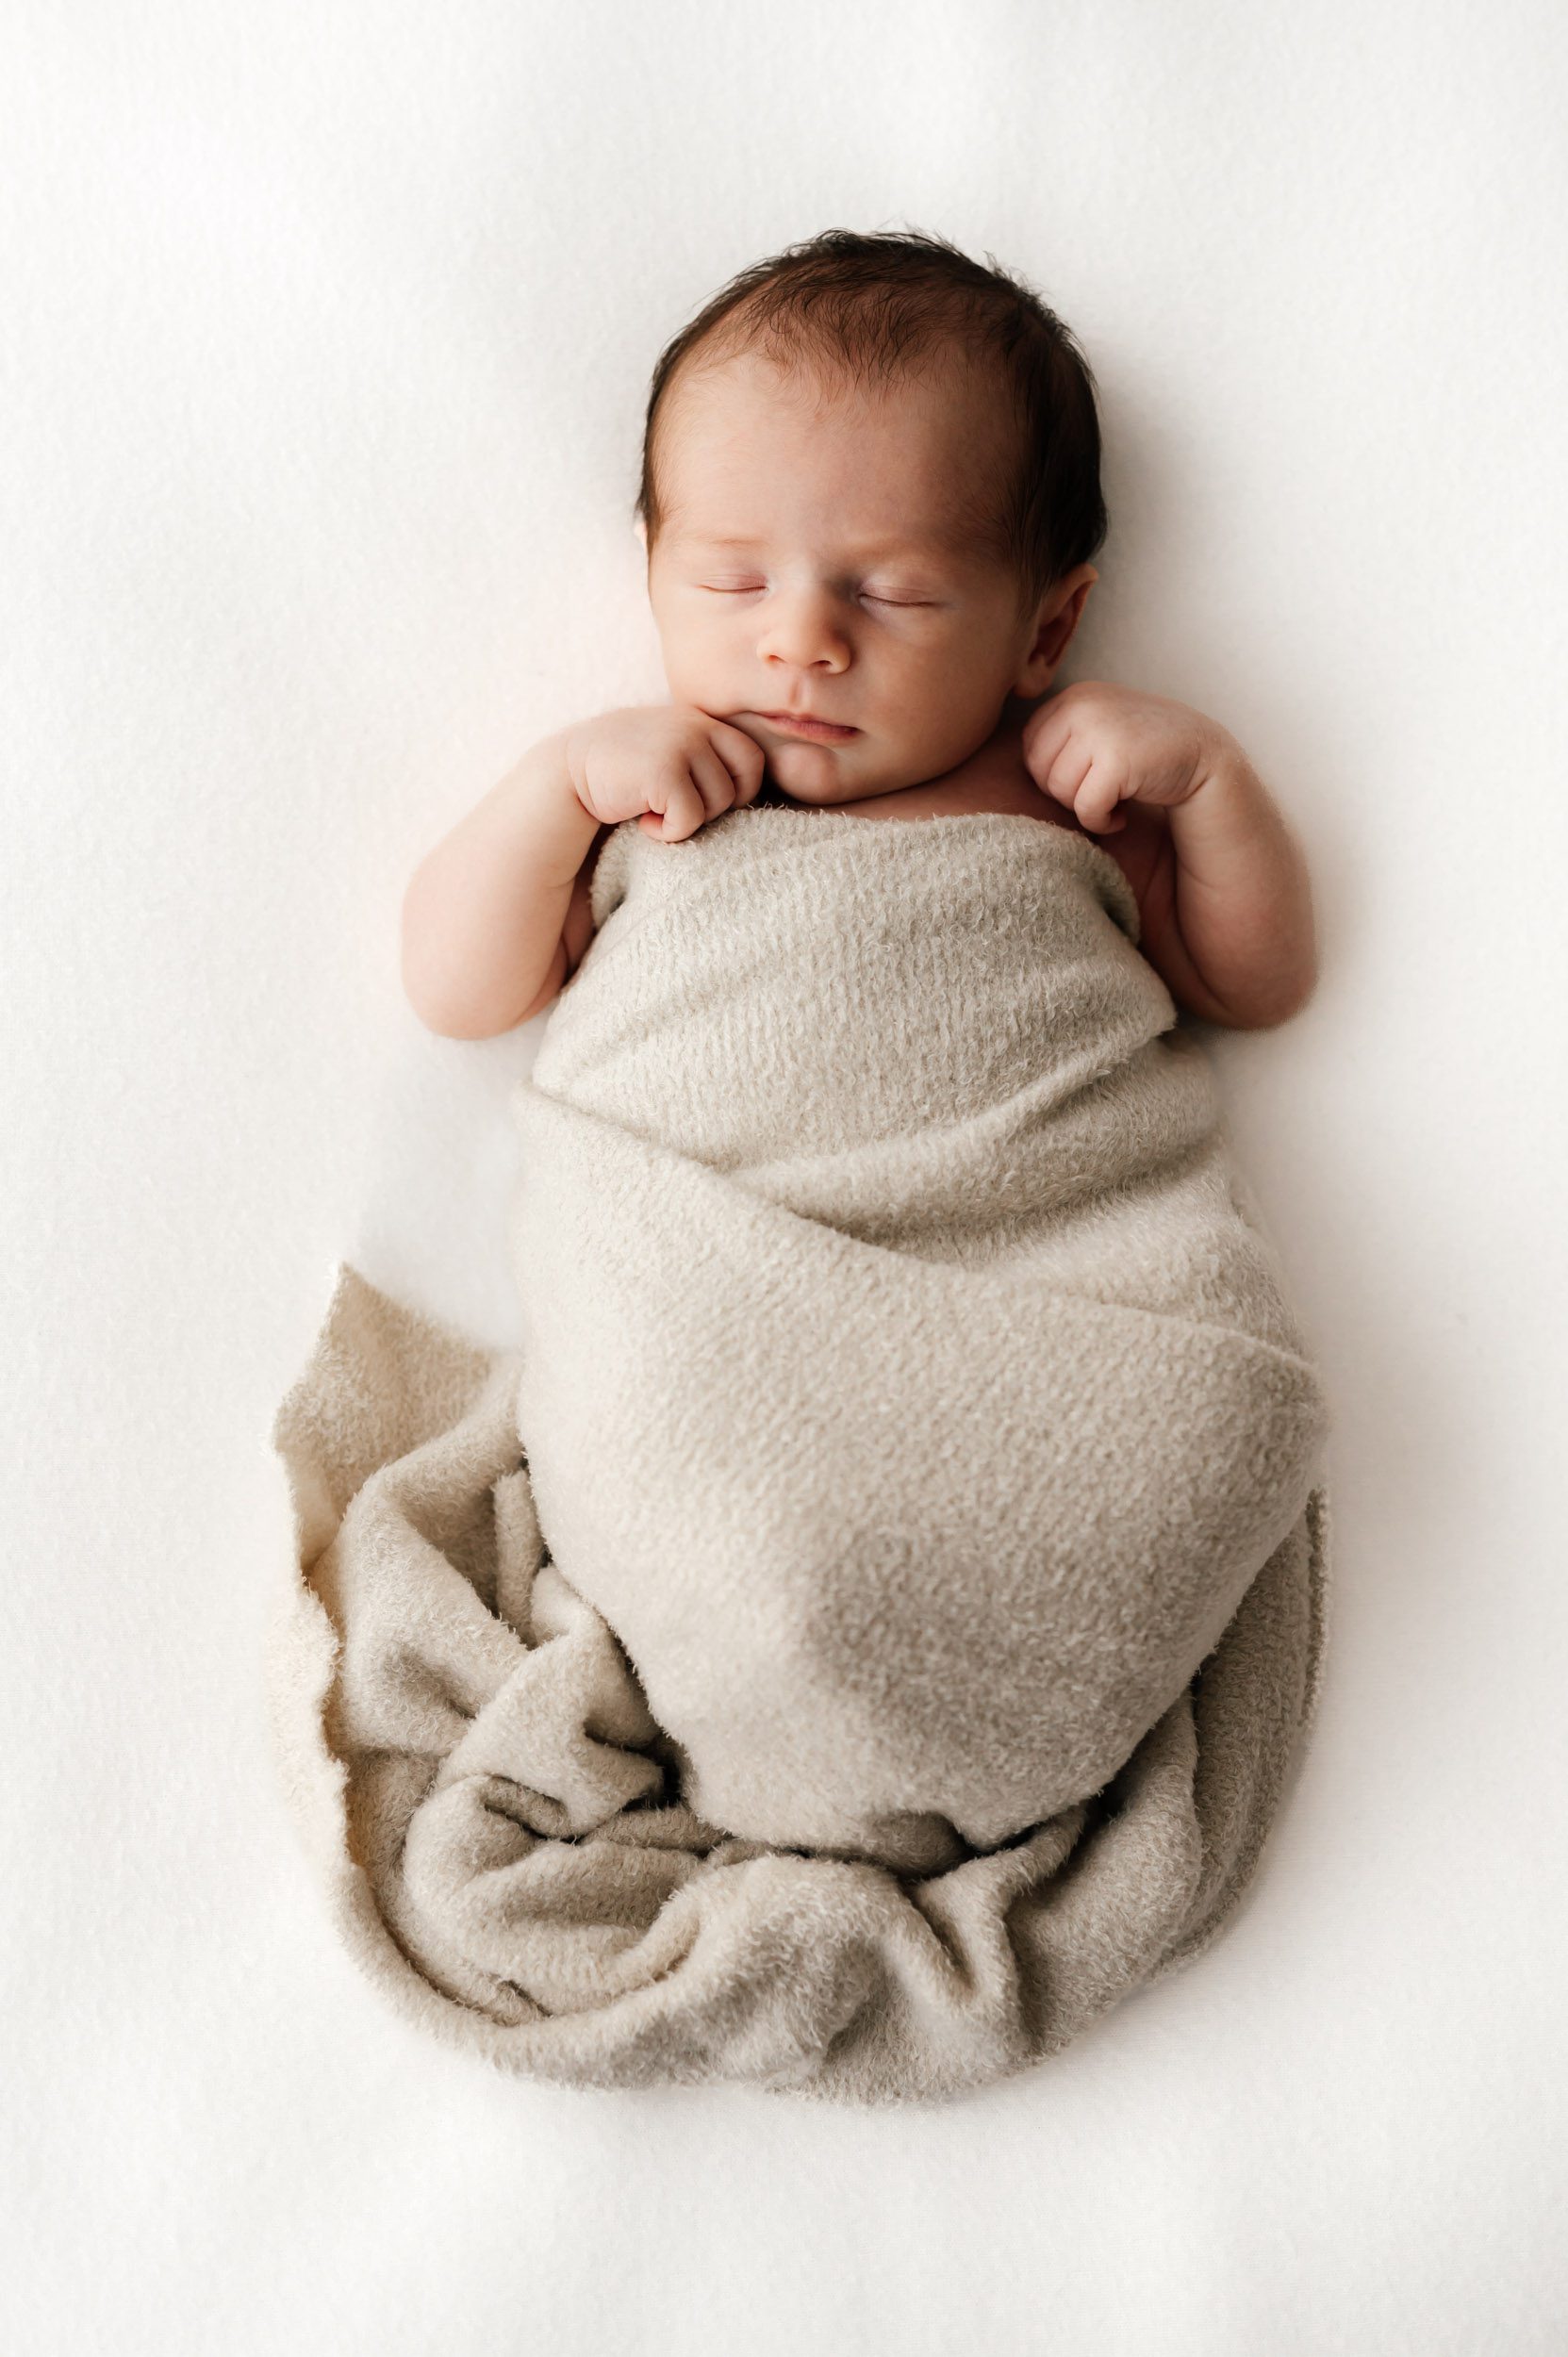 a baby boy wrapped in a beige fuzzy swaddle sleeping on a white backdrop with his hands tucked up against his cheeks during a newborn photo session